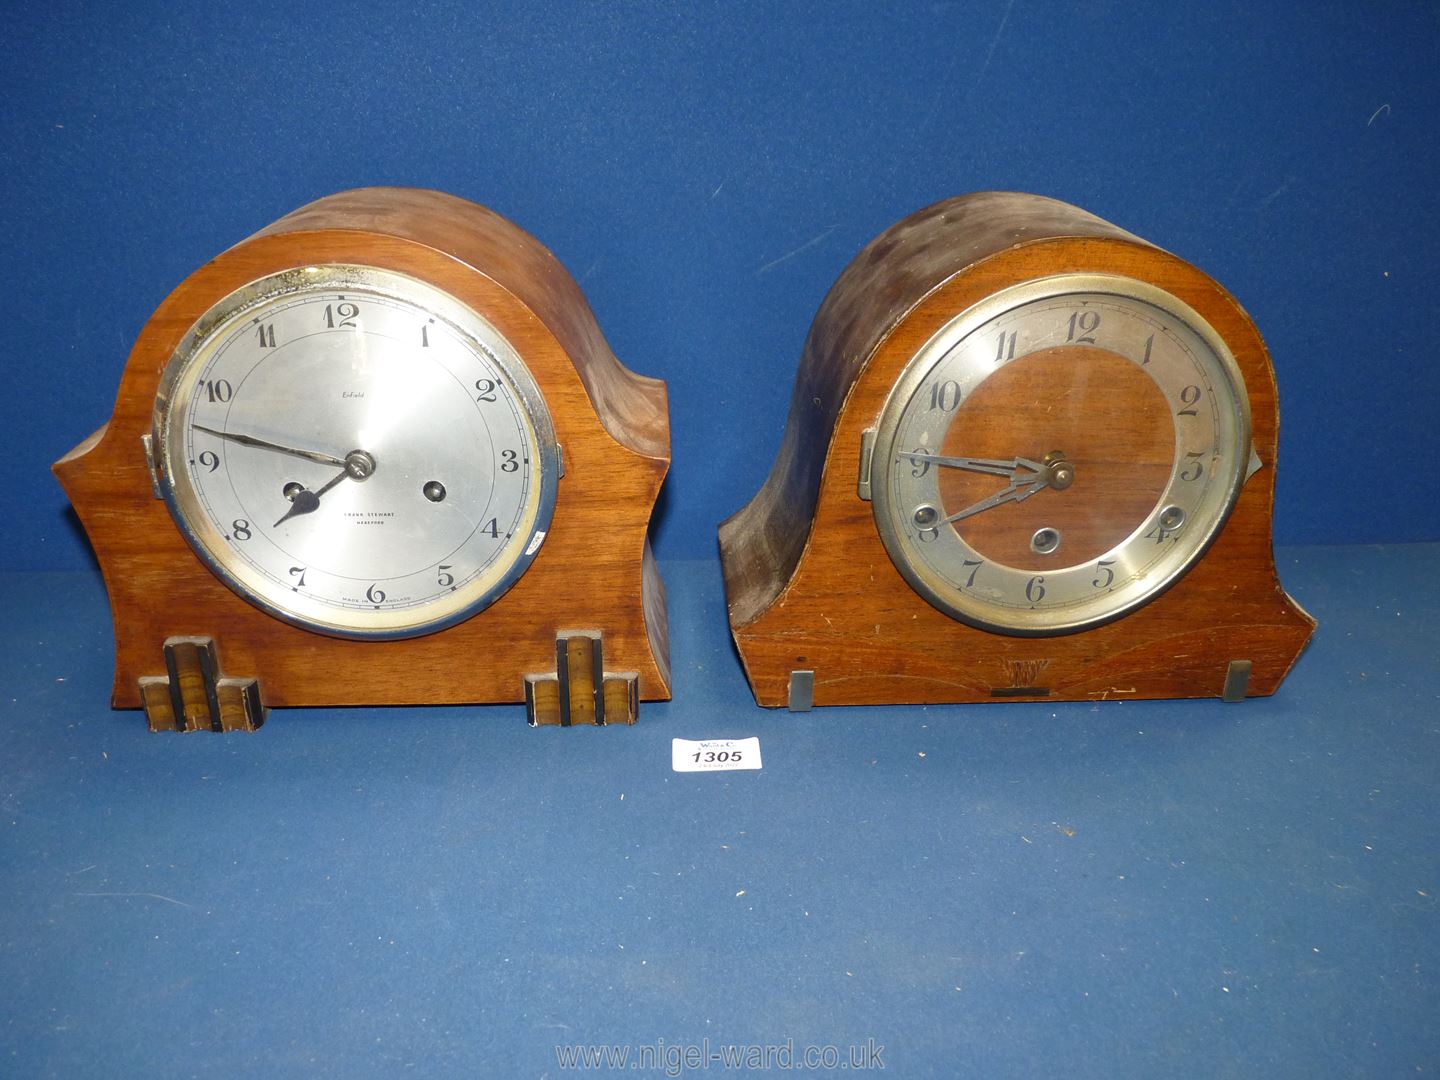 Two wooden cased mantle clocks including Enfield and Westminster chime, both a/f.